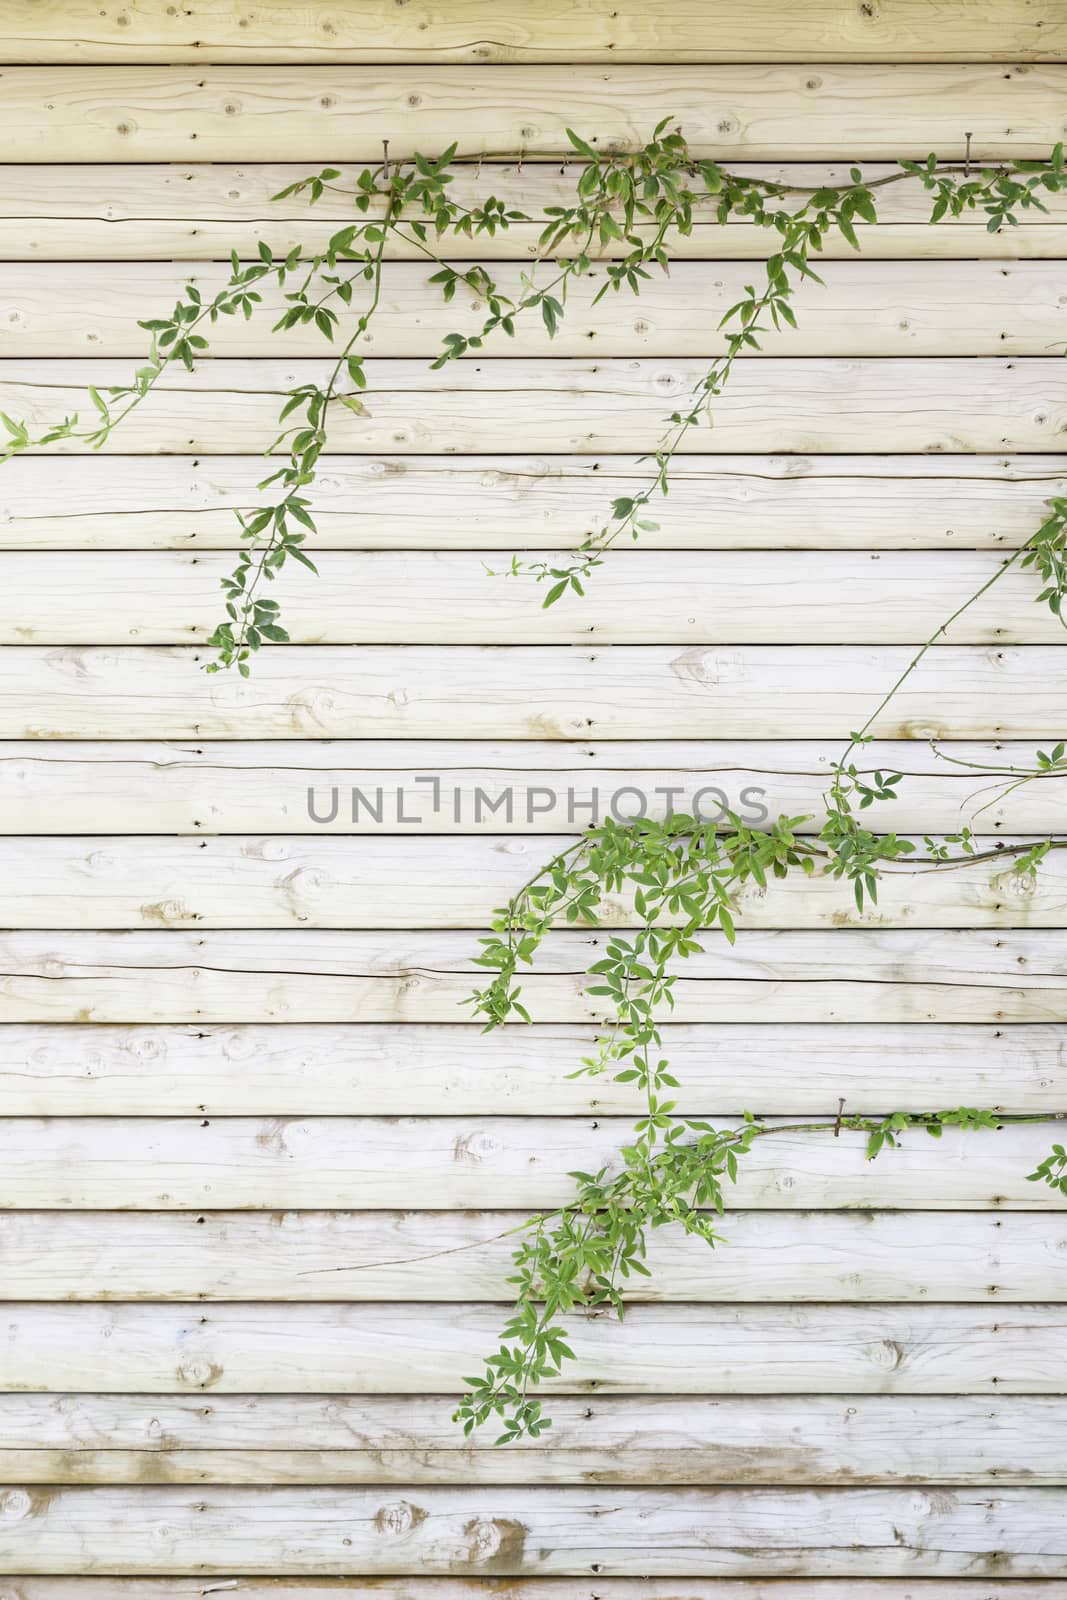 Wooden background with green ivy, detail of a wooden wall with plants, exploration and nature